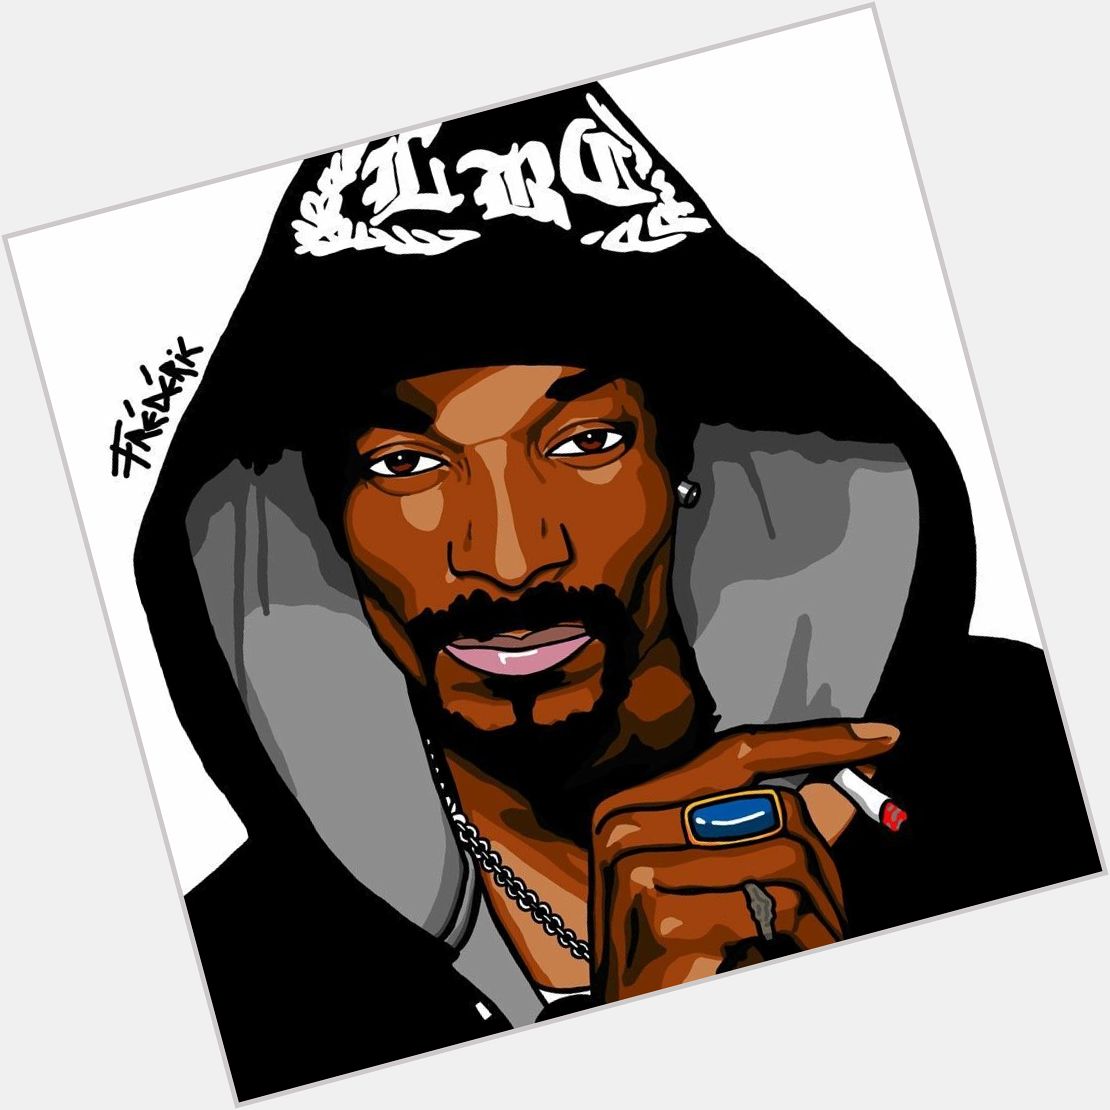 HAPPY BDAY Snoop dogg i wish him the best bday a bit late for it but thats okay GO FOLLOW SNOOP DOGG 